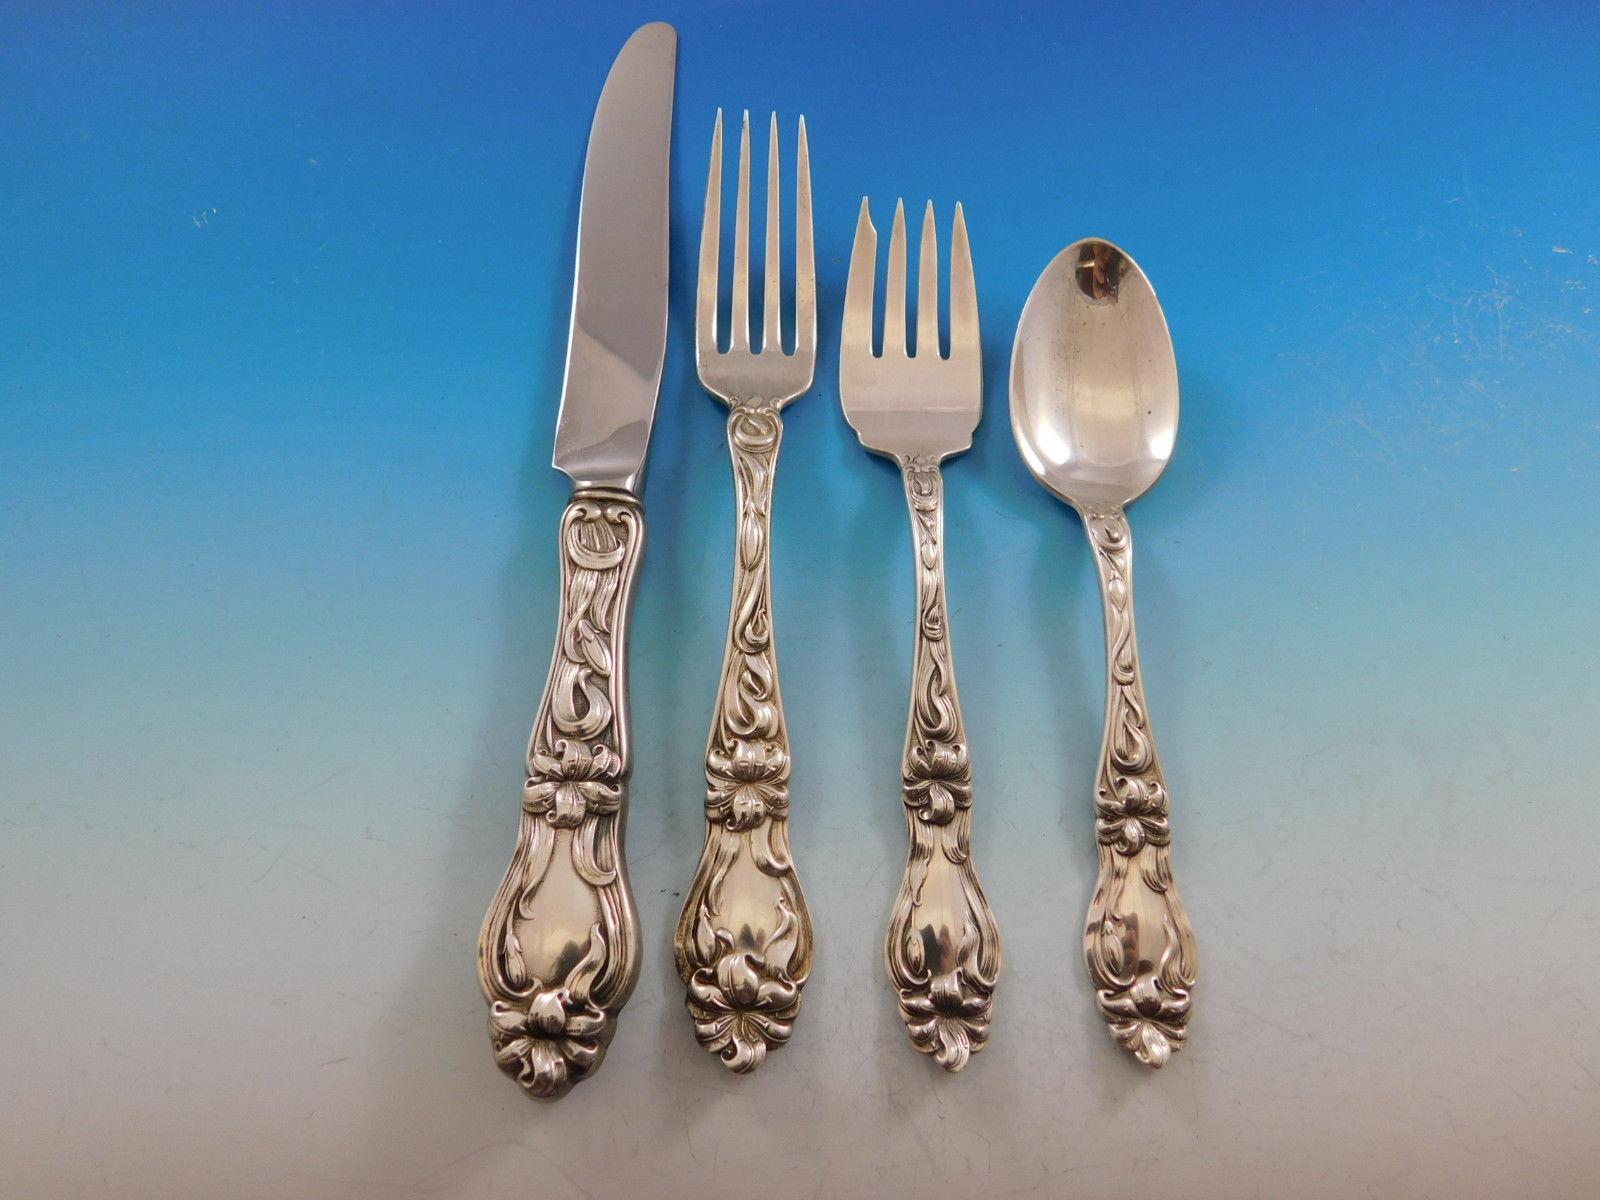 Lily AKA floral by Frank Whiting sterling silver flatware set - 36 pieces. This popular Victorian style pattern was introduced in the year 1910. Great starter set! This set includes:

Six knives, wide handles, 9